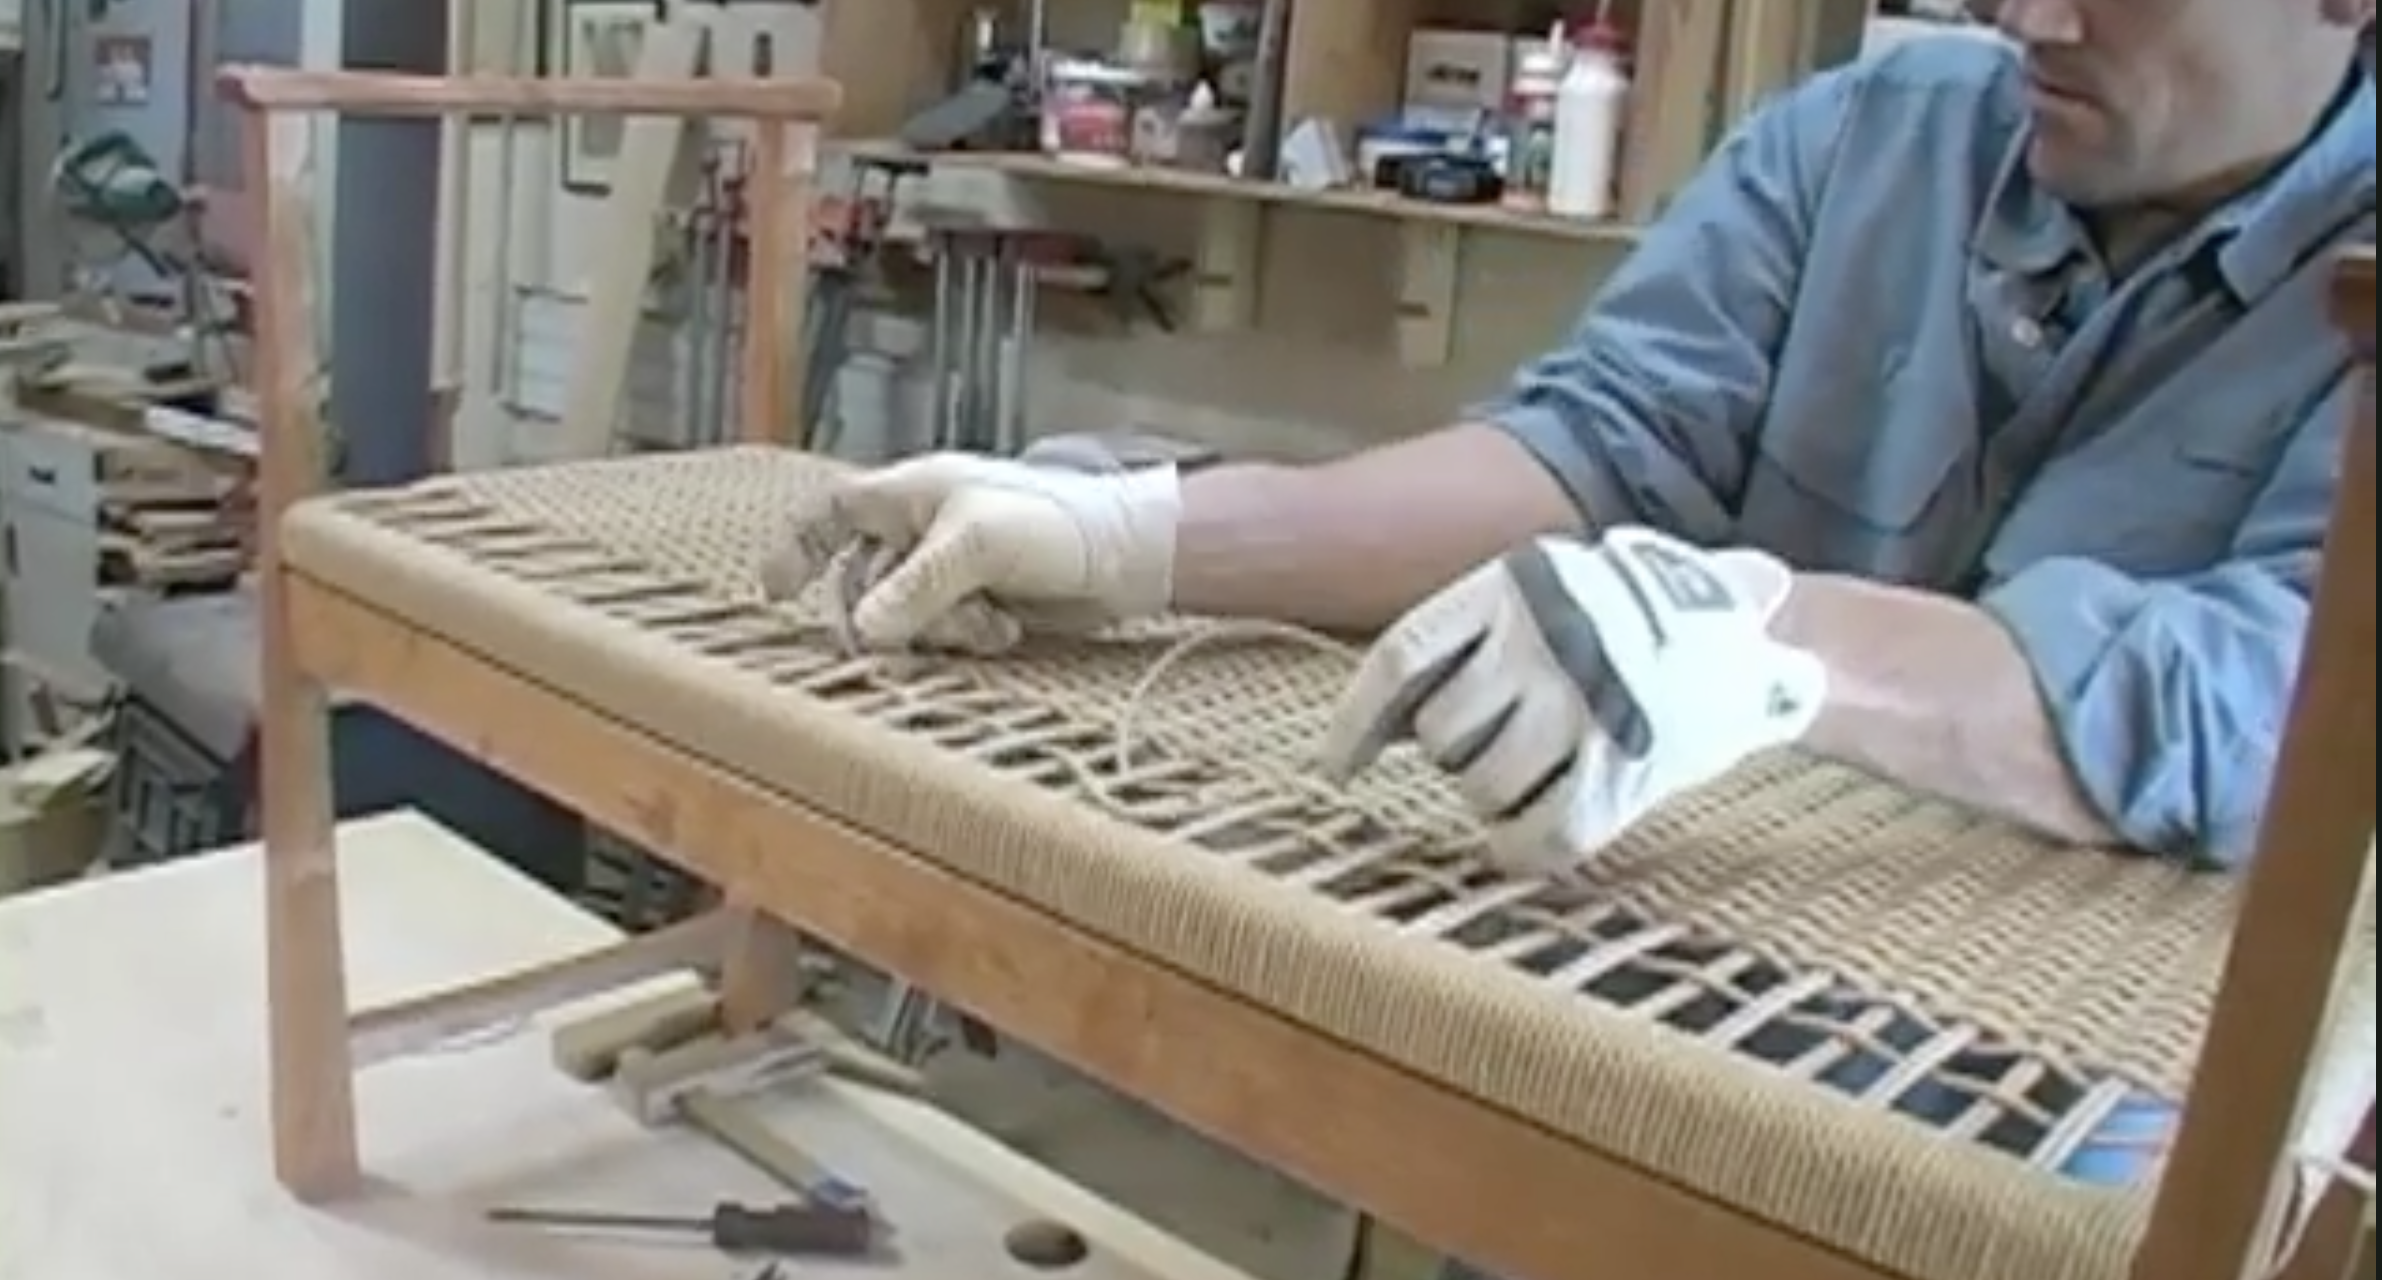 How to Create a Danish-Cord Seating Surface - Core77